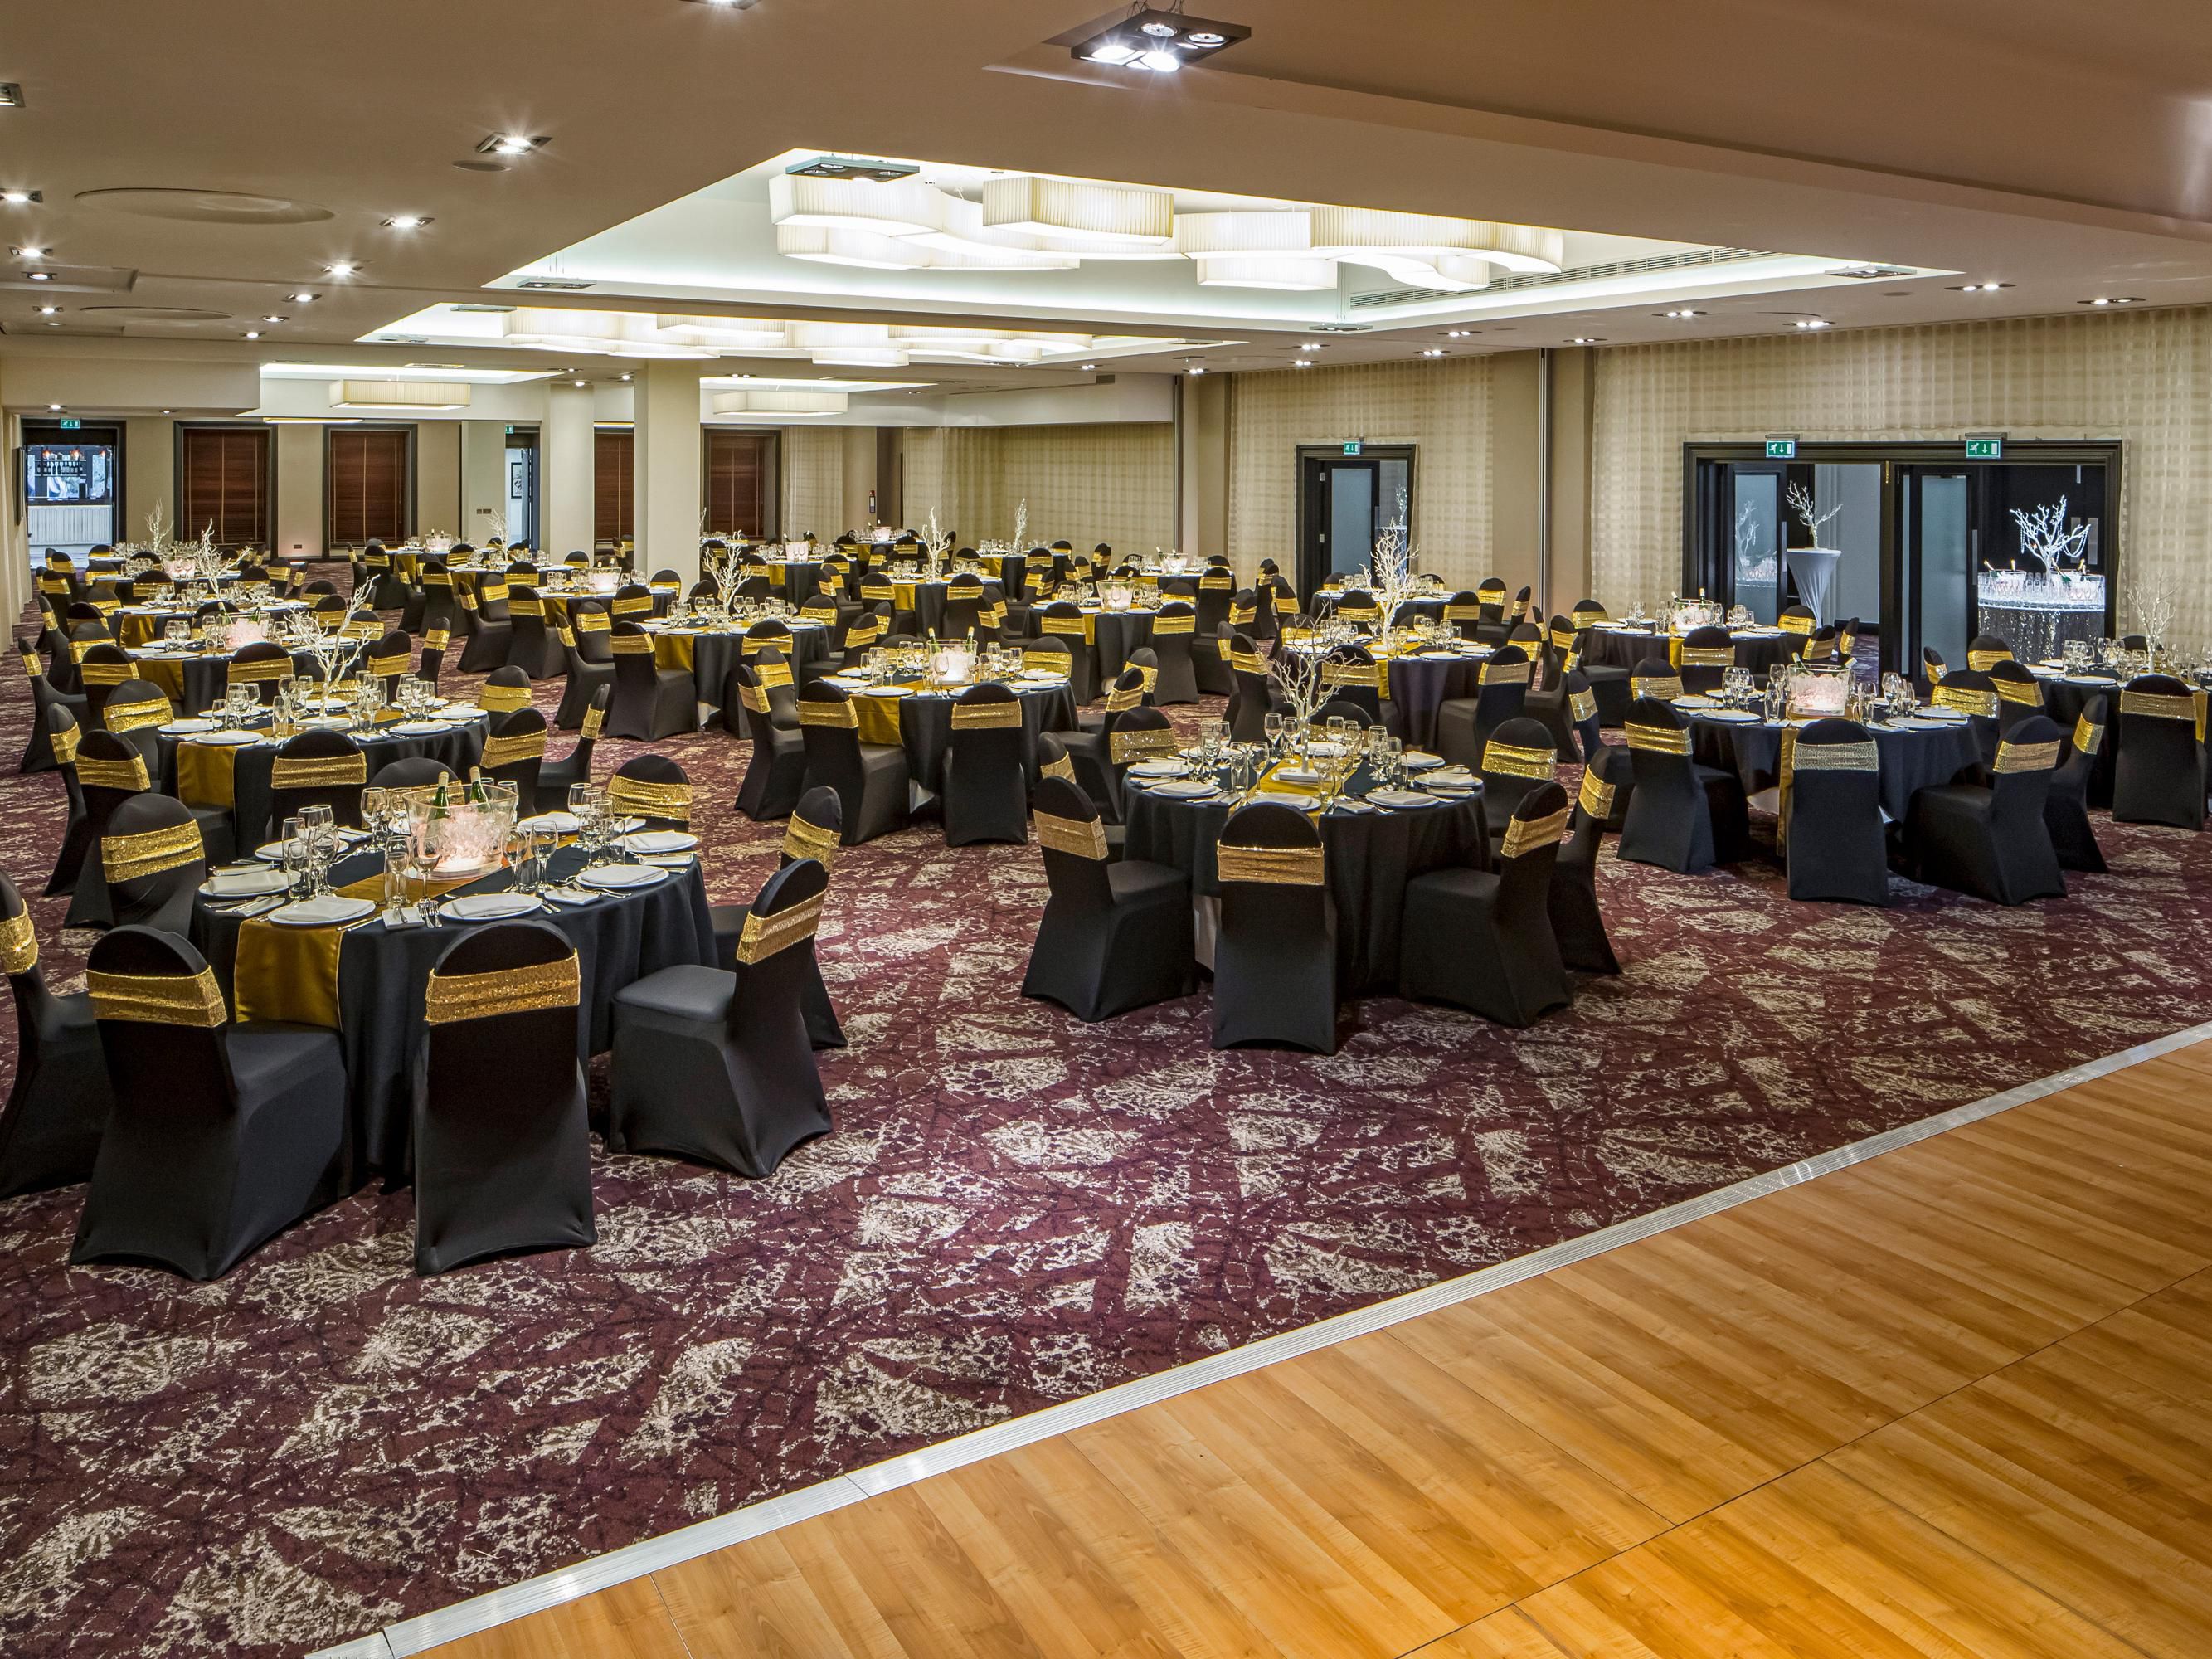 The Grand Ballroom is an impressive room for any occasion.

With capacity for 550 guests, enjoy a sumptuous meal in fantastic surroundings.

The room is tailored to meet your event needs including space for AV and technical equipment as well as ceiling rigging points.